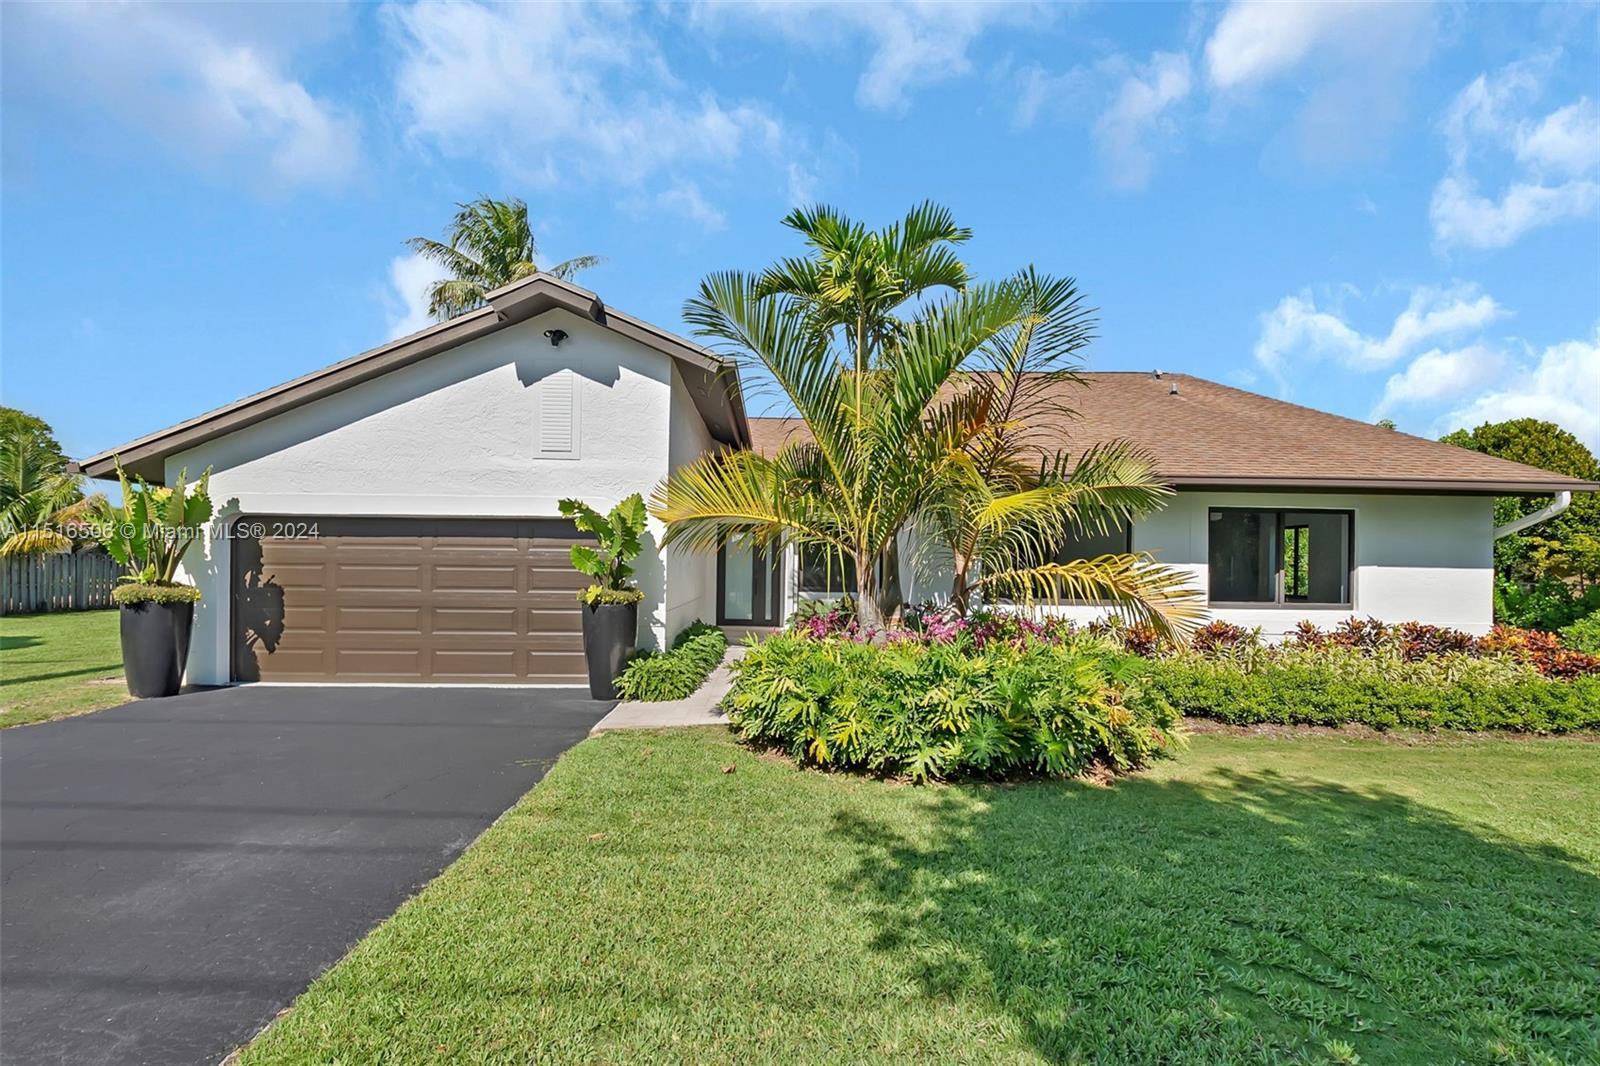 This stunning, completely remodeled home boasts 4 spacious bdrms & 2.5 baths on an oversized, gated 